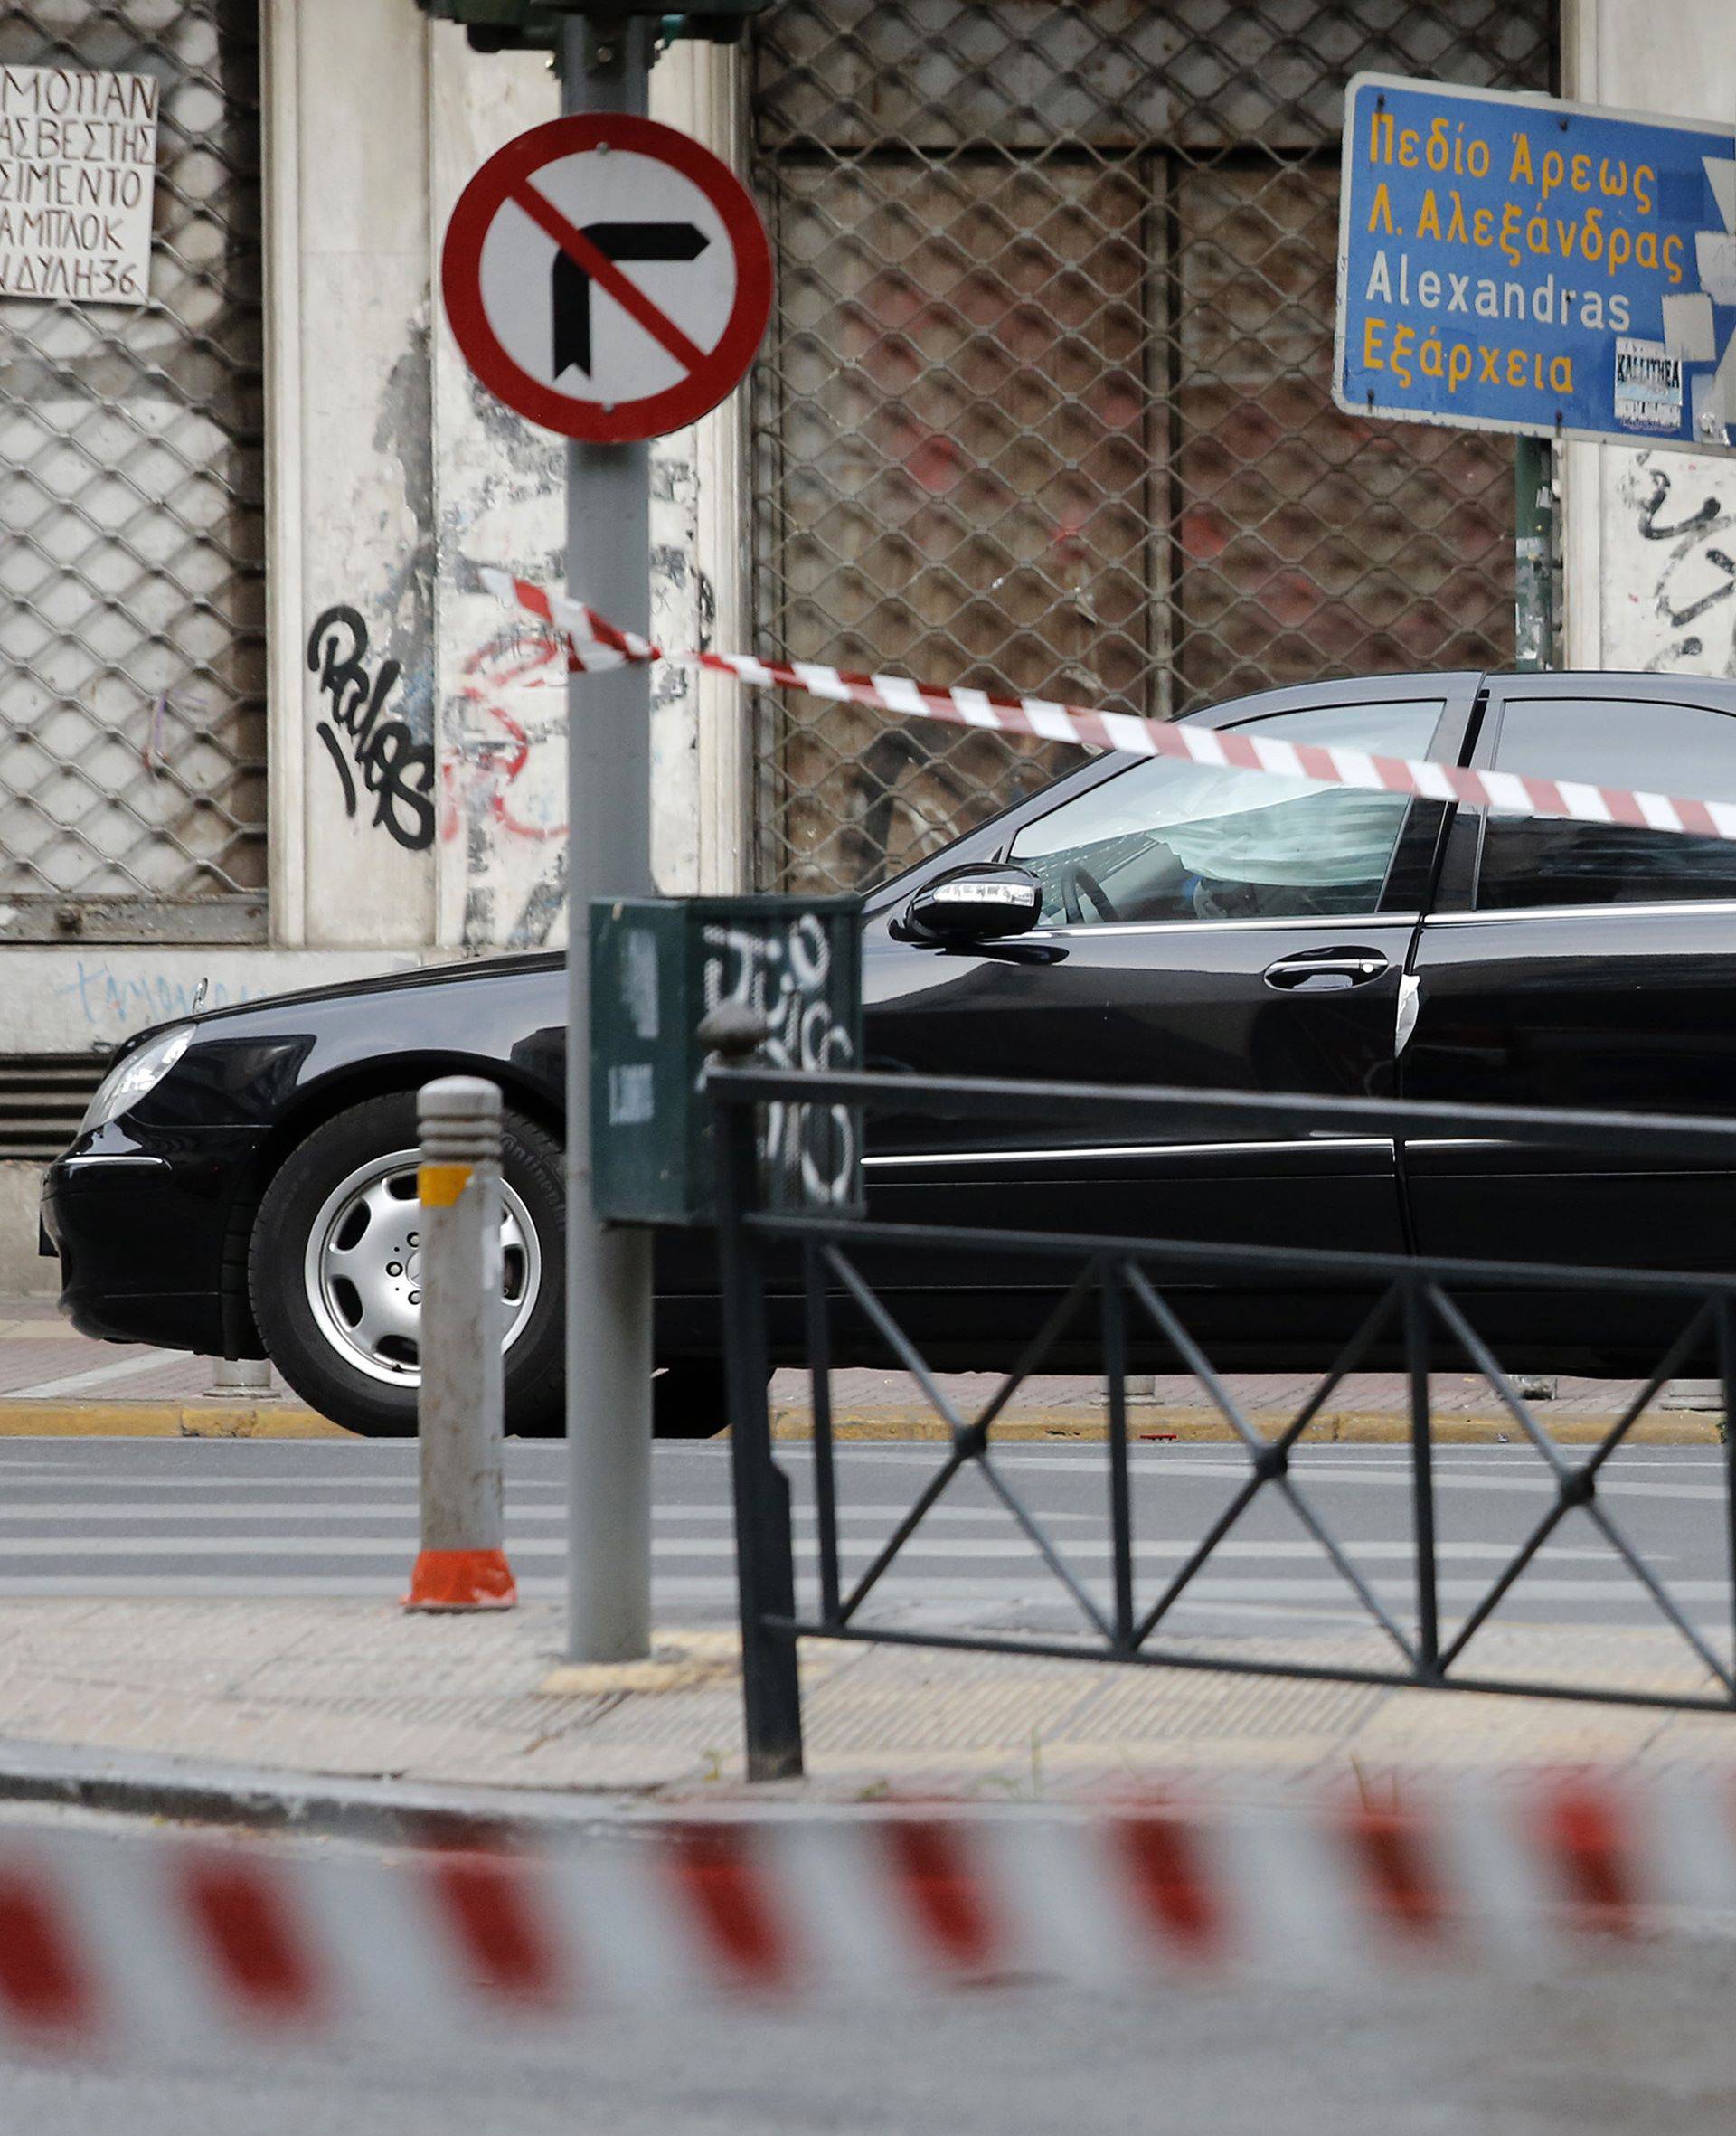 A police officer secures the area around the car of former Greek prime minister and former central bank chief Lucas Papademos following the detonation of an envelope injuring him and his driver, in Athens